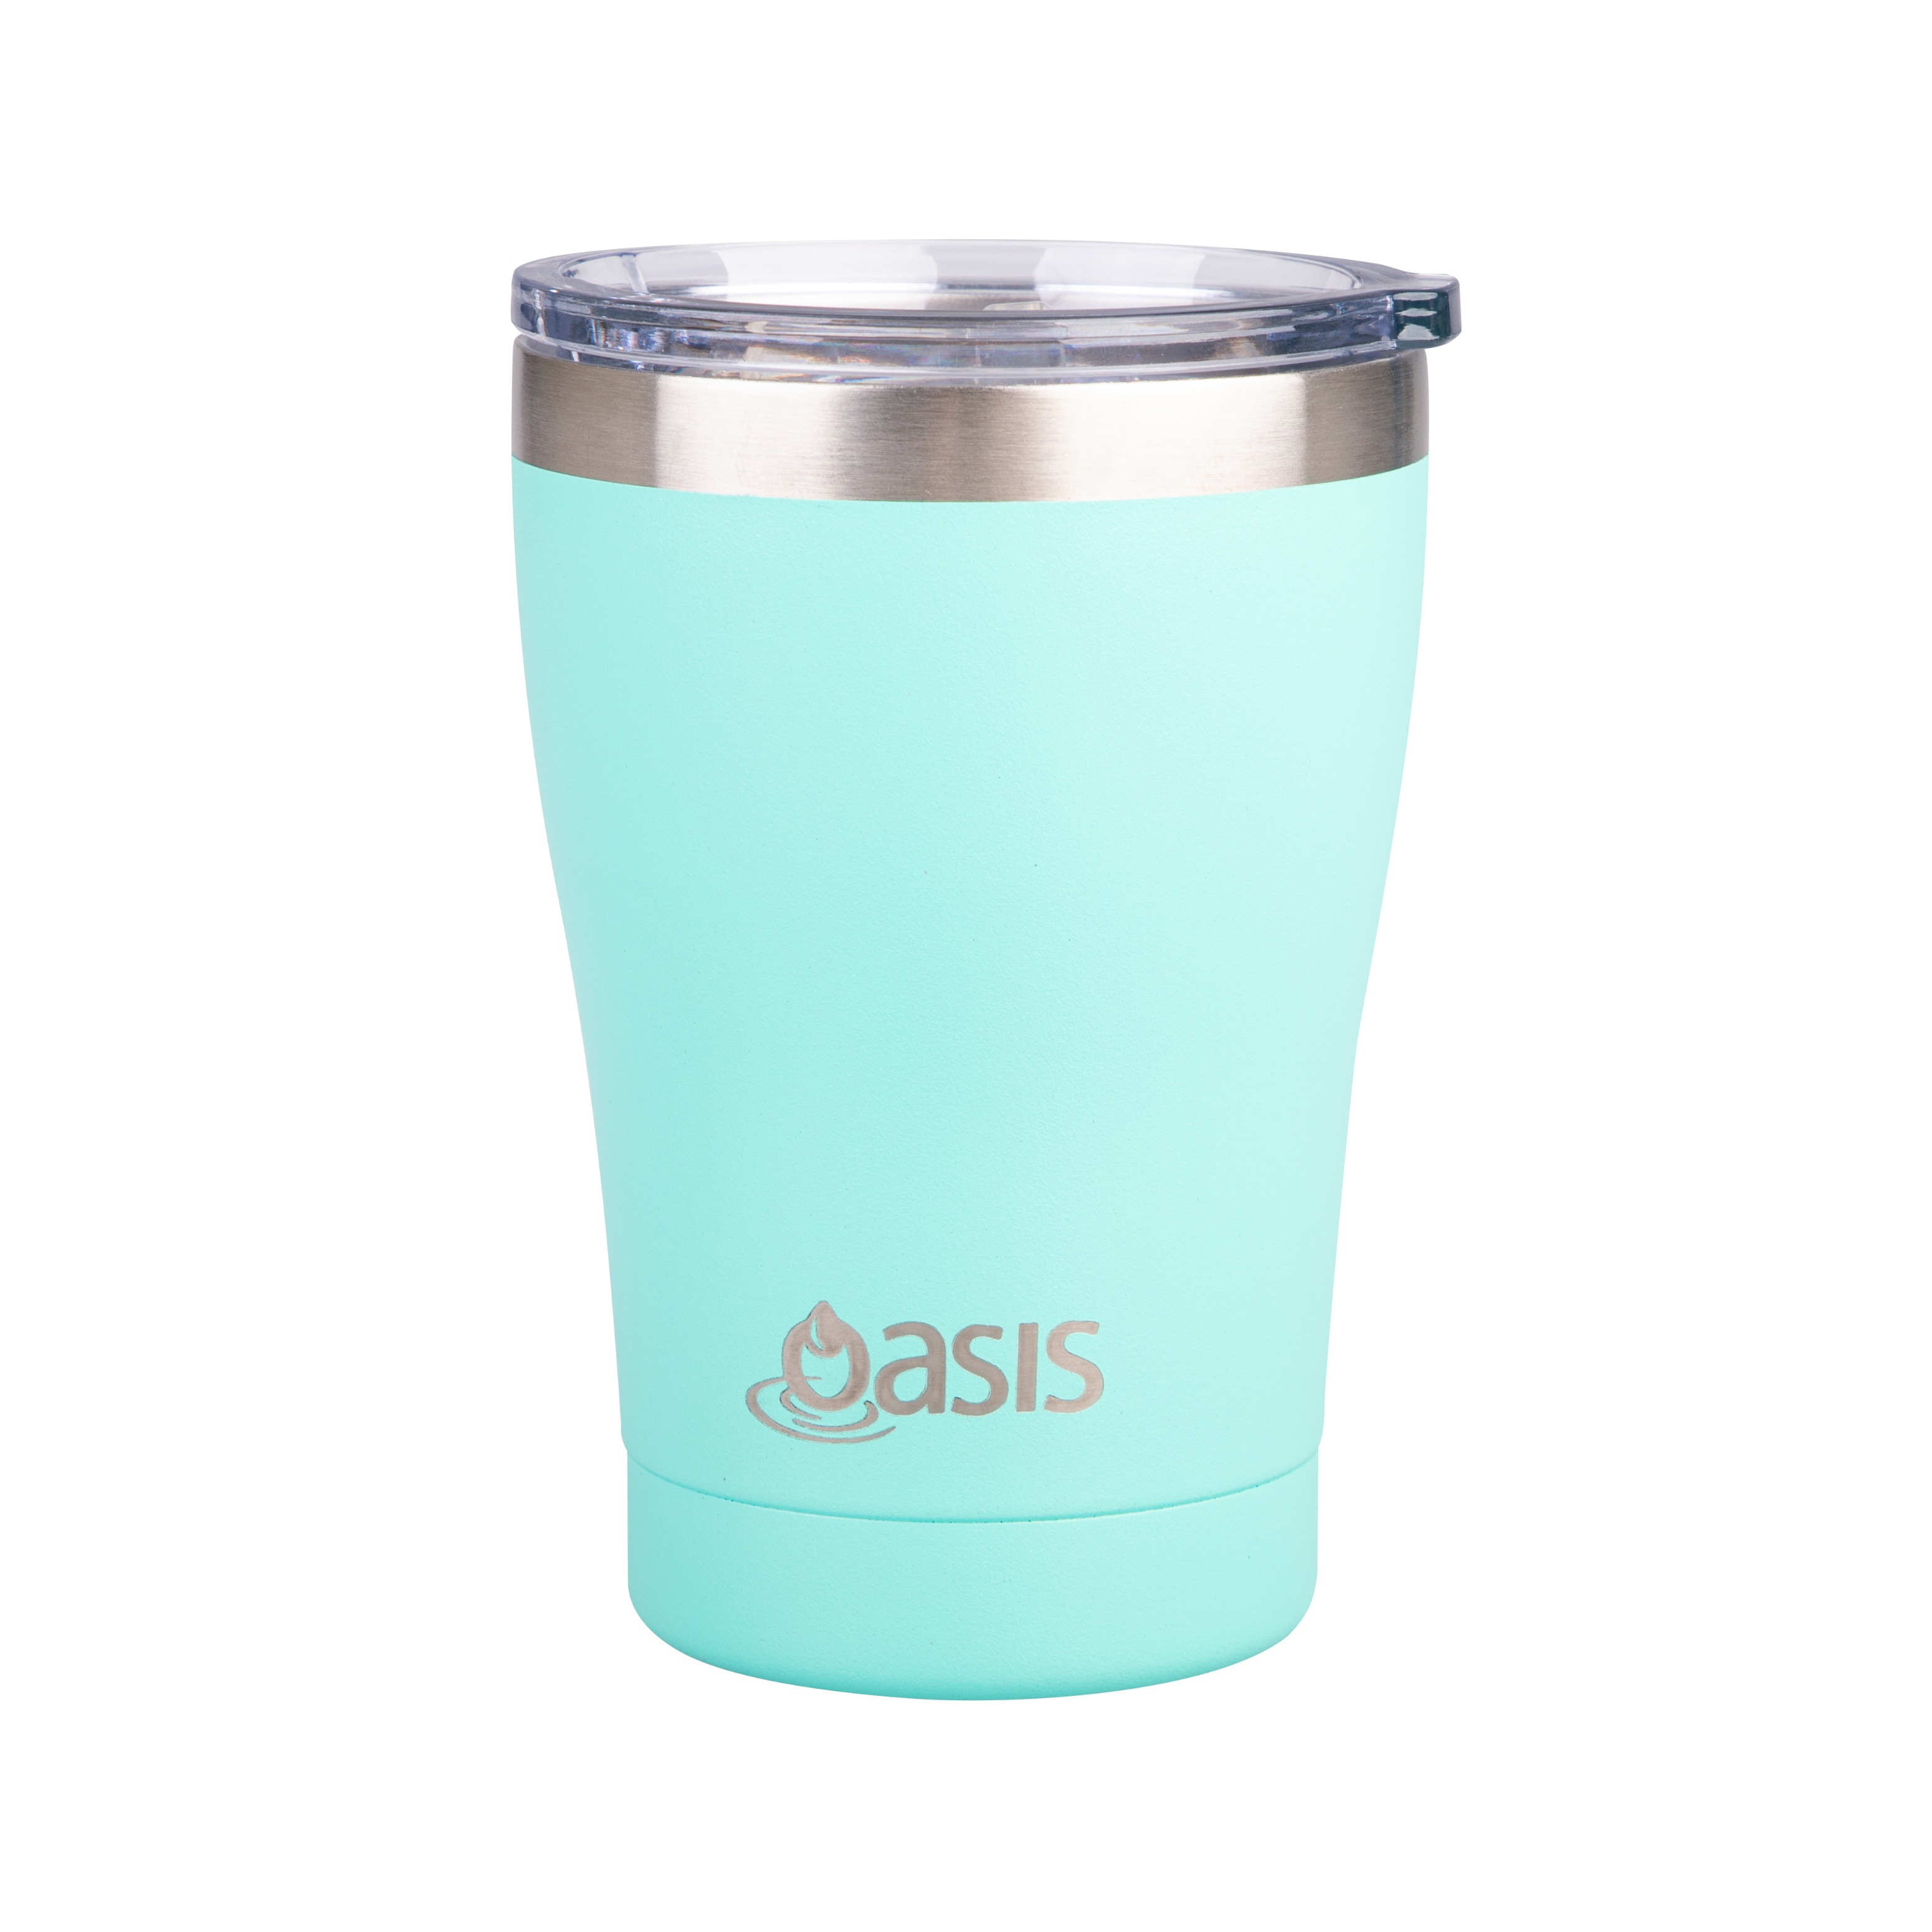 Oasis Stainless Steel Double Wall Insulated Travel Mug 350ml Mint